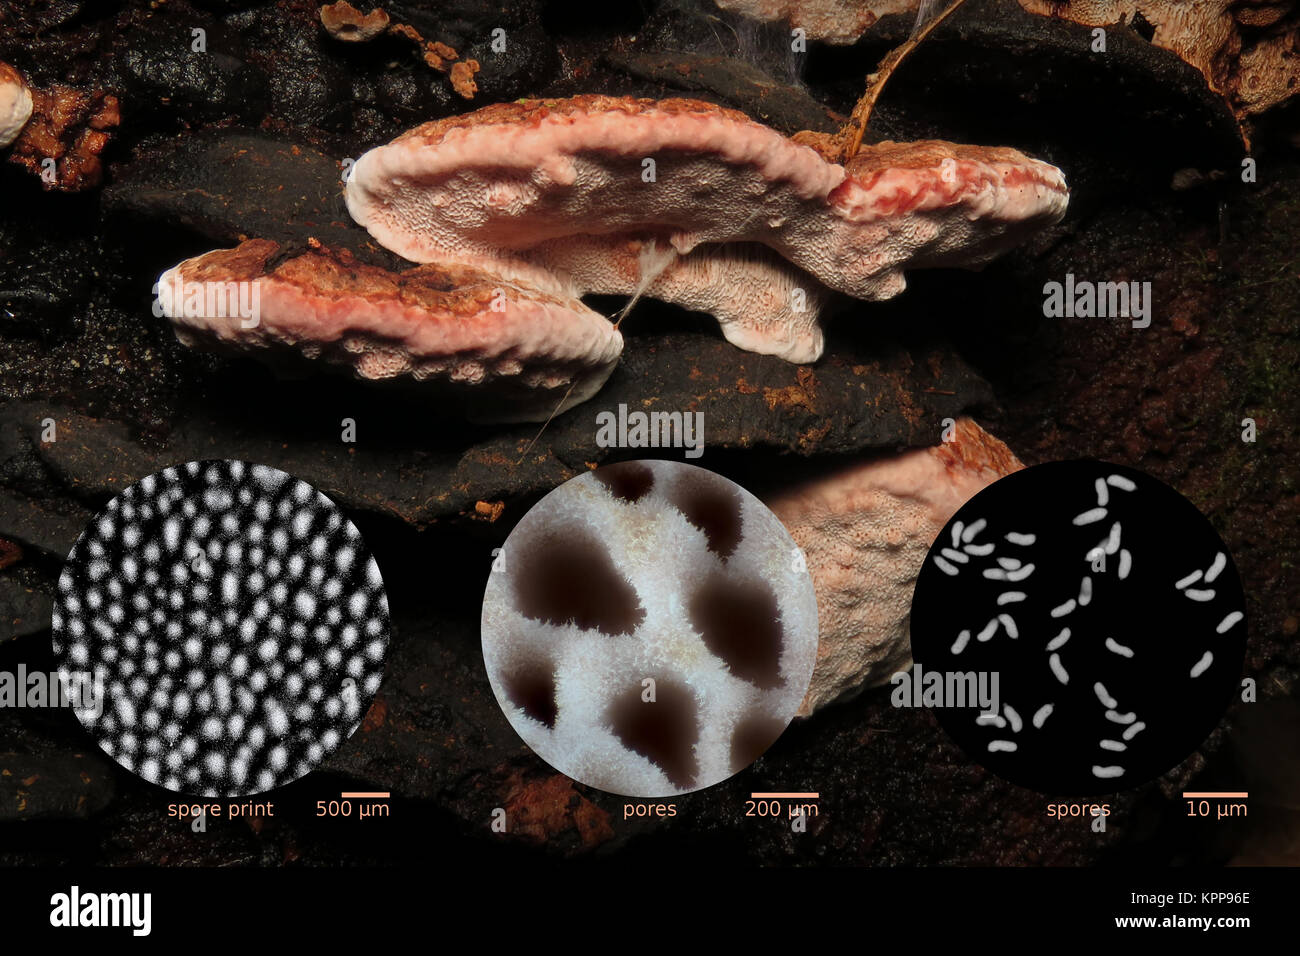 Rosy conk (Fomitopsis cajanderi, synonyms Fomitopsis subrosea and Fomes subrosea) with micrographs of the spore print, pores, and individual spores Stock Photo